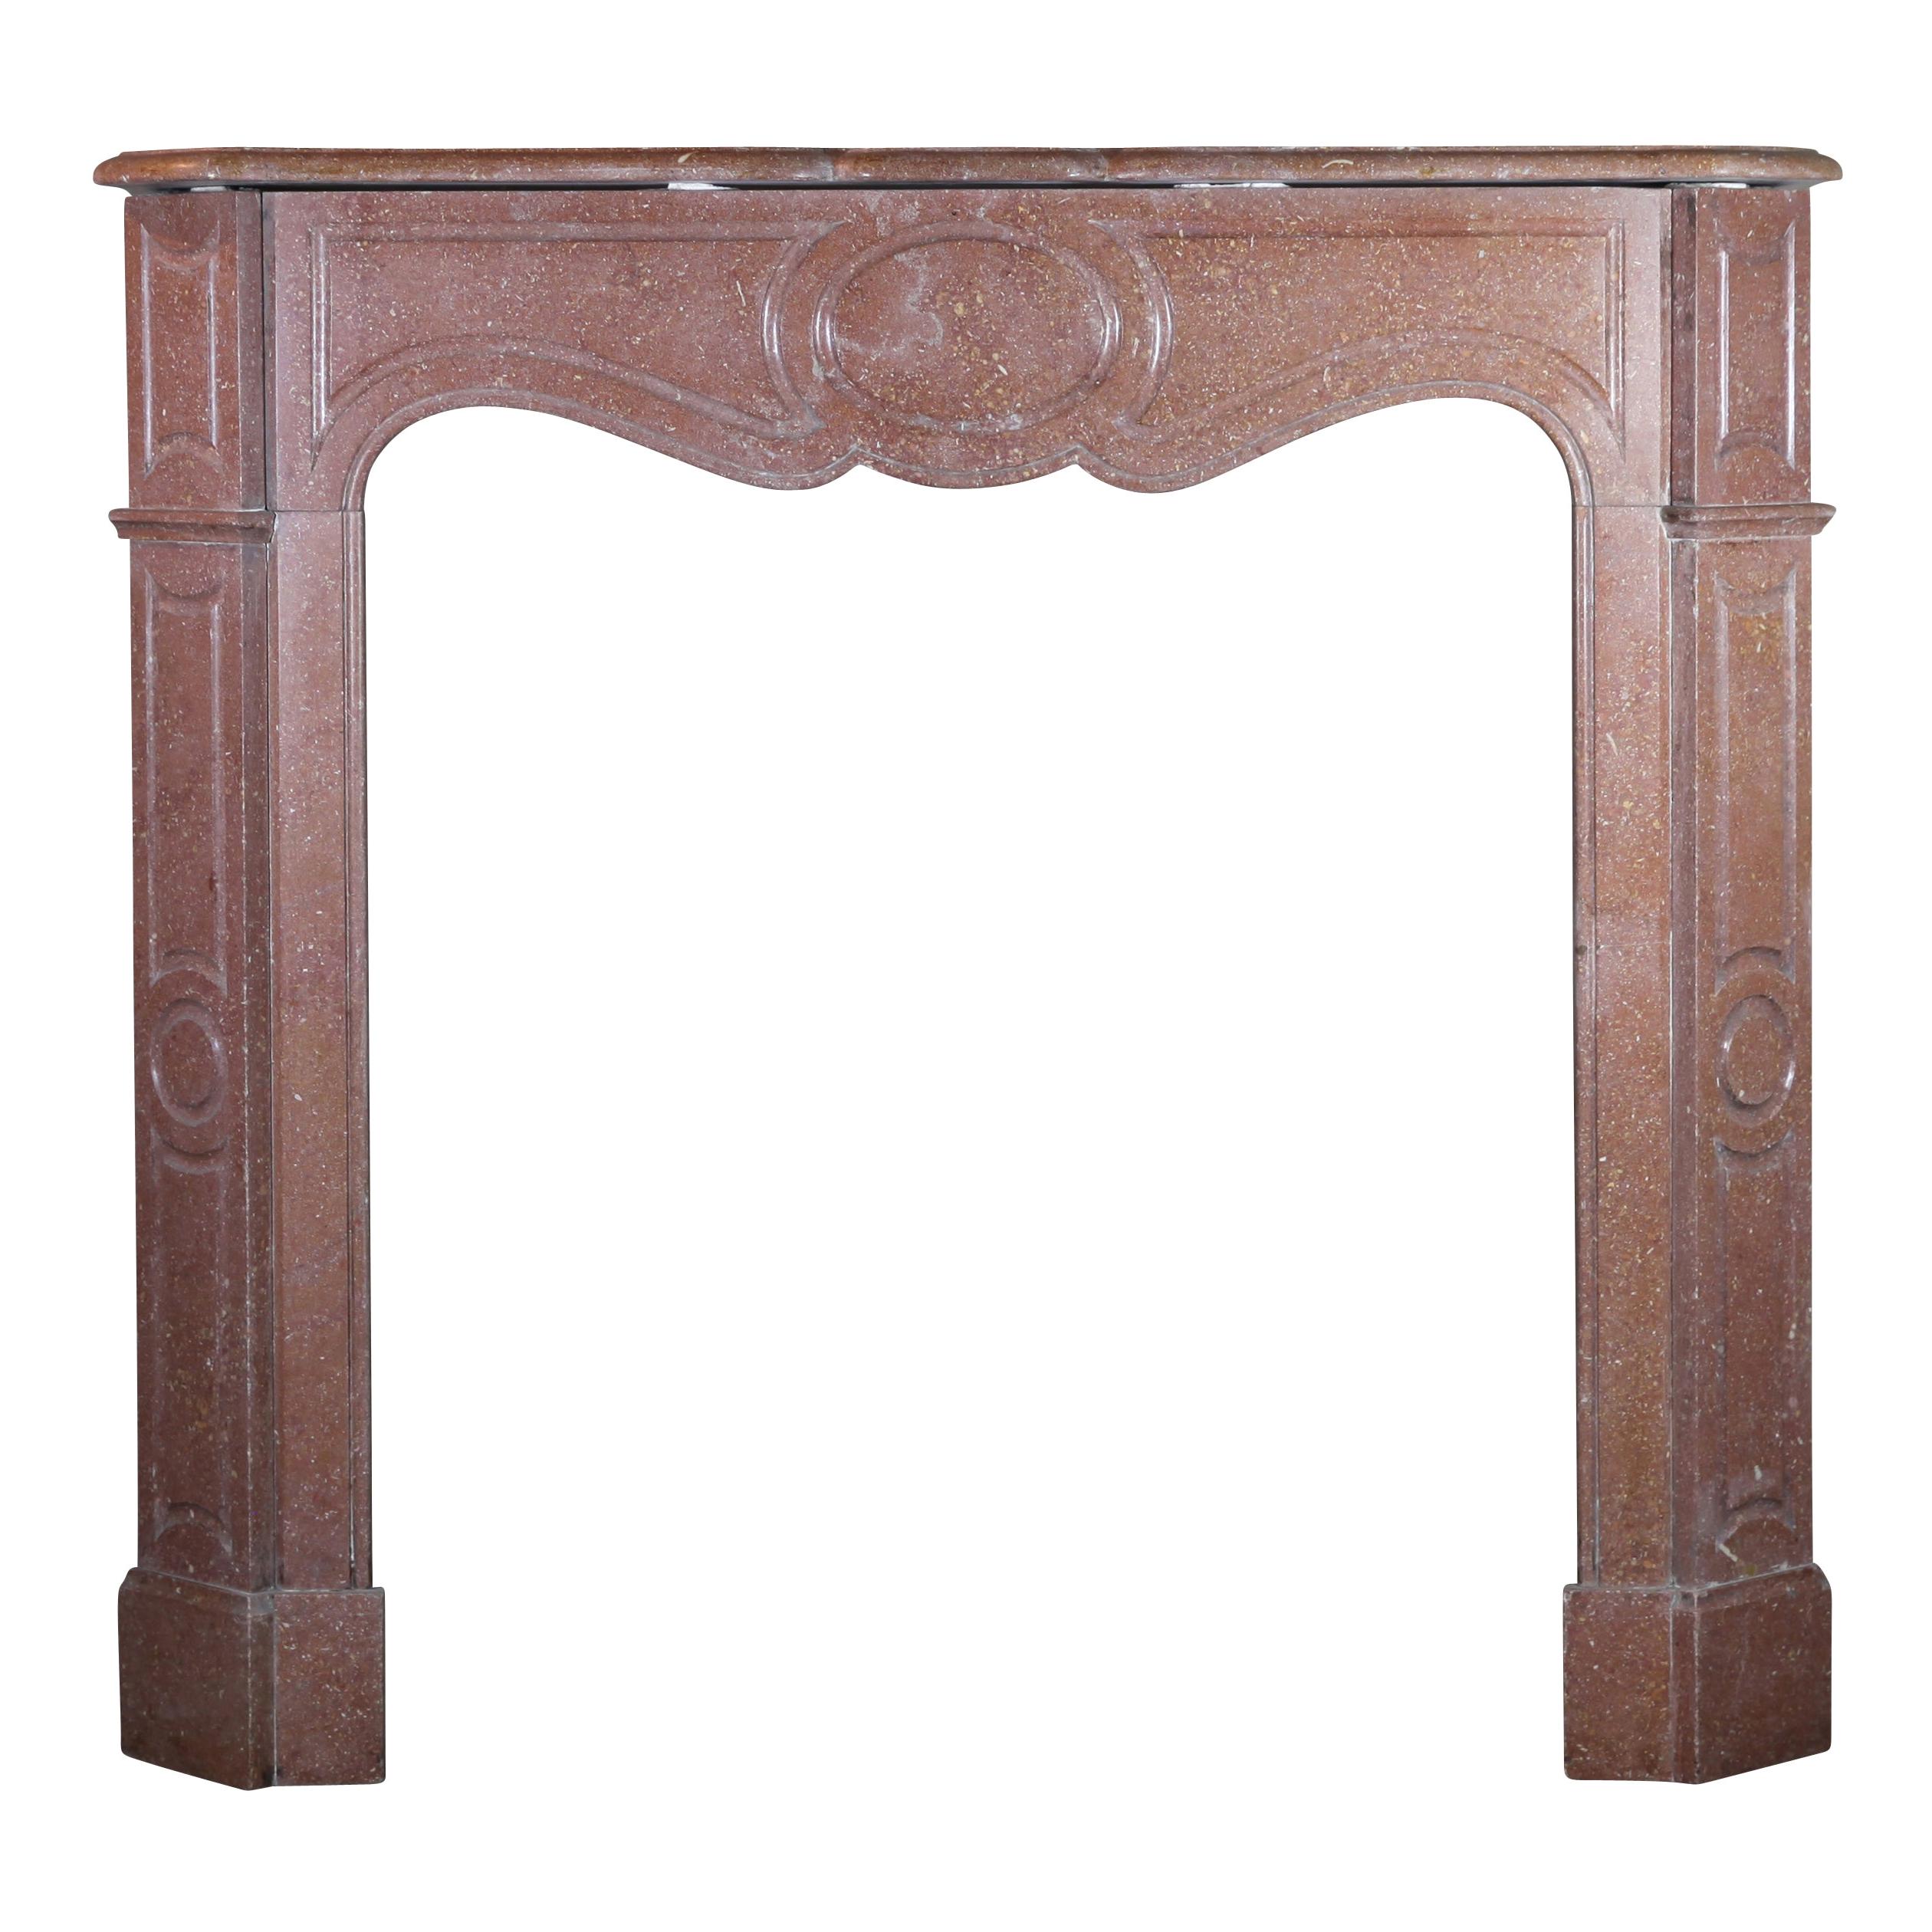 19th Century French Classic Petite Pompadour Marble Fireplace Surround For Sale